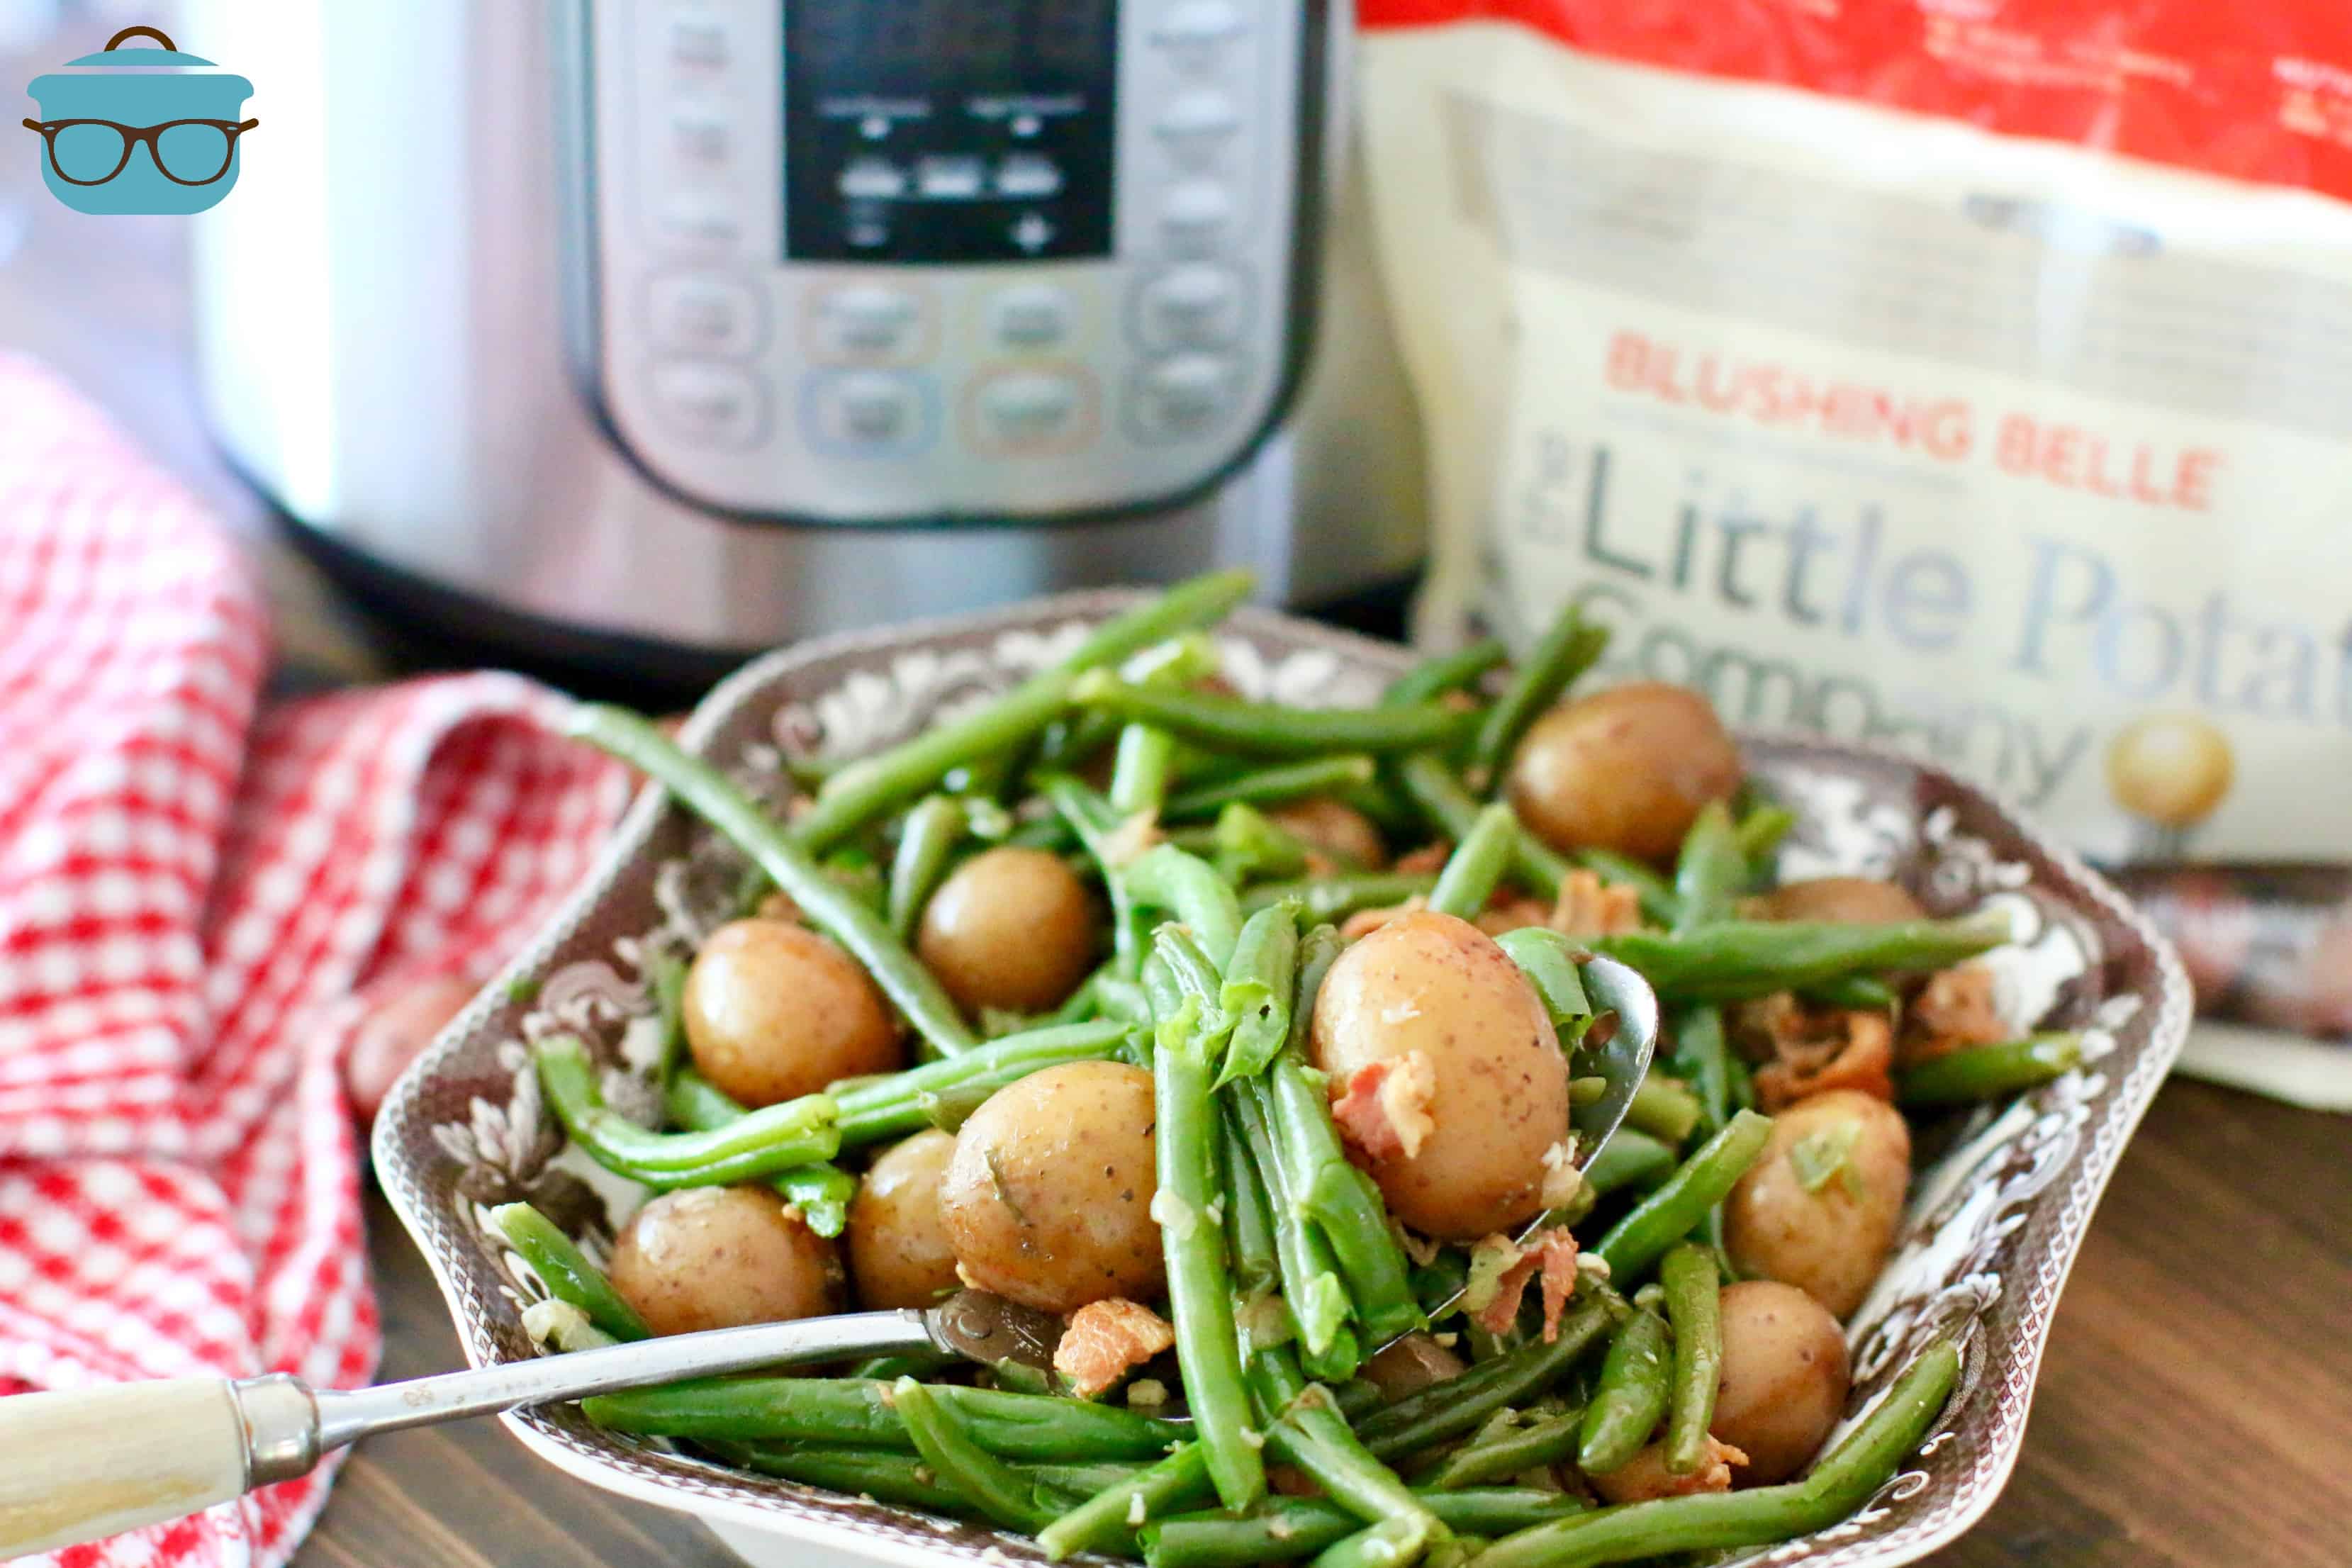 Instant Pot Garlic Green Beans and Bacon with Potatoes shown in a brown and white bowl.